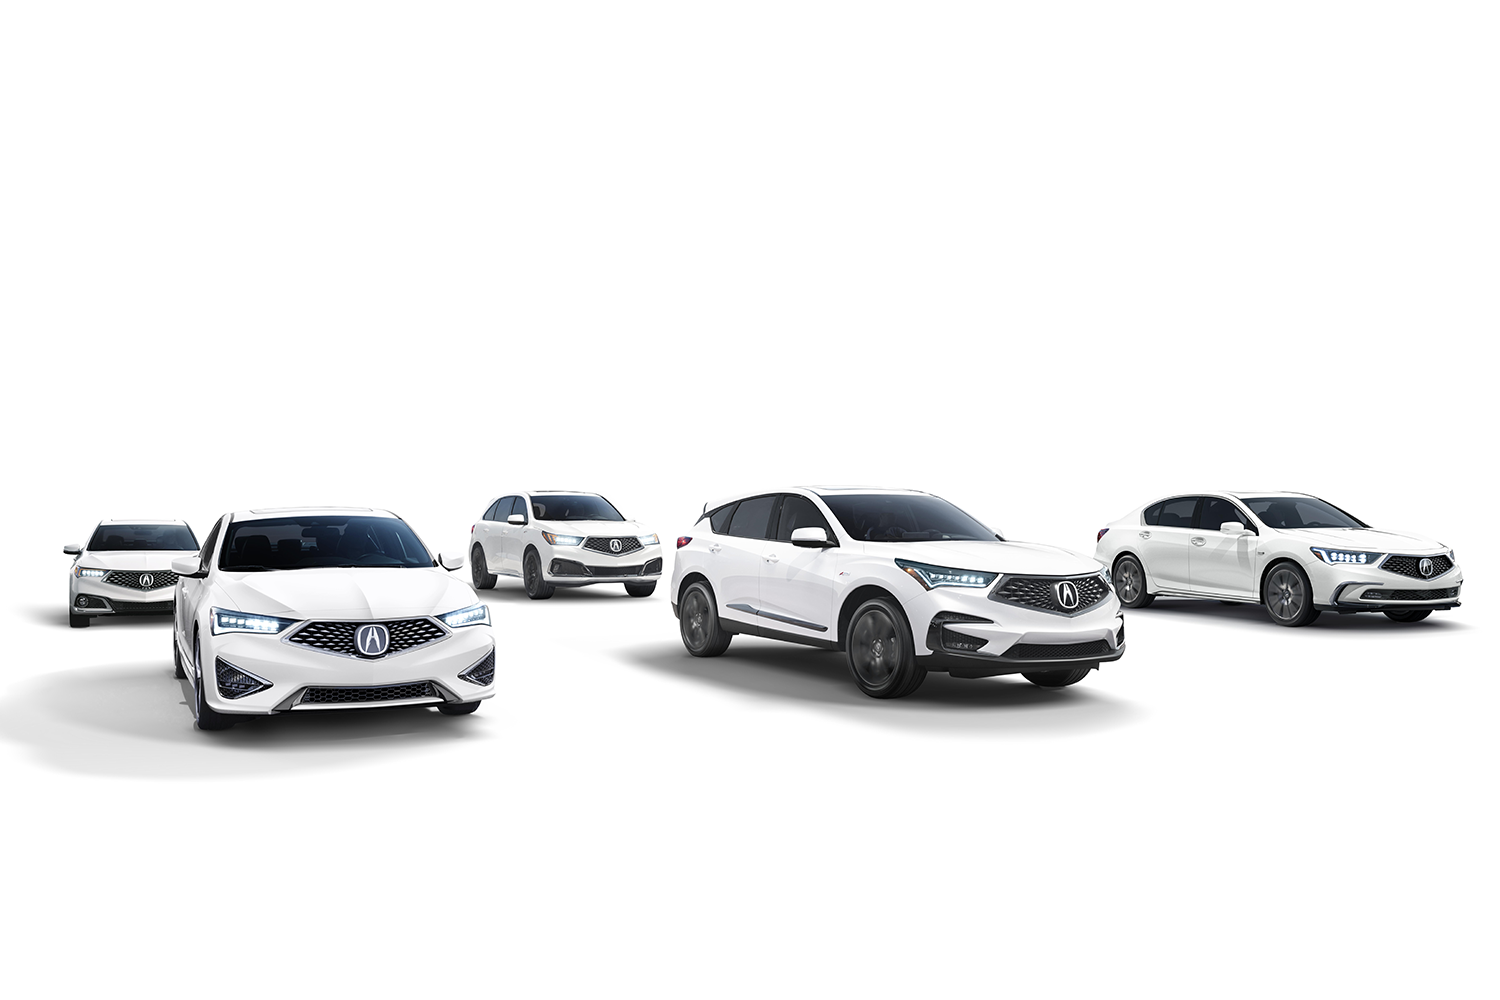 New Acura available in Roseville, CA at Niello Acura